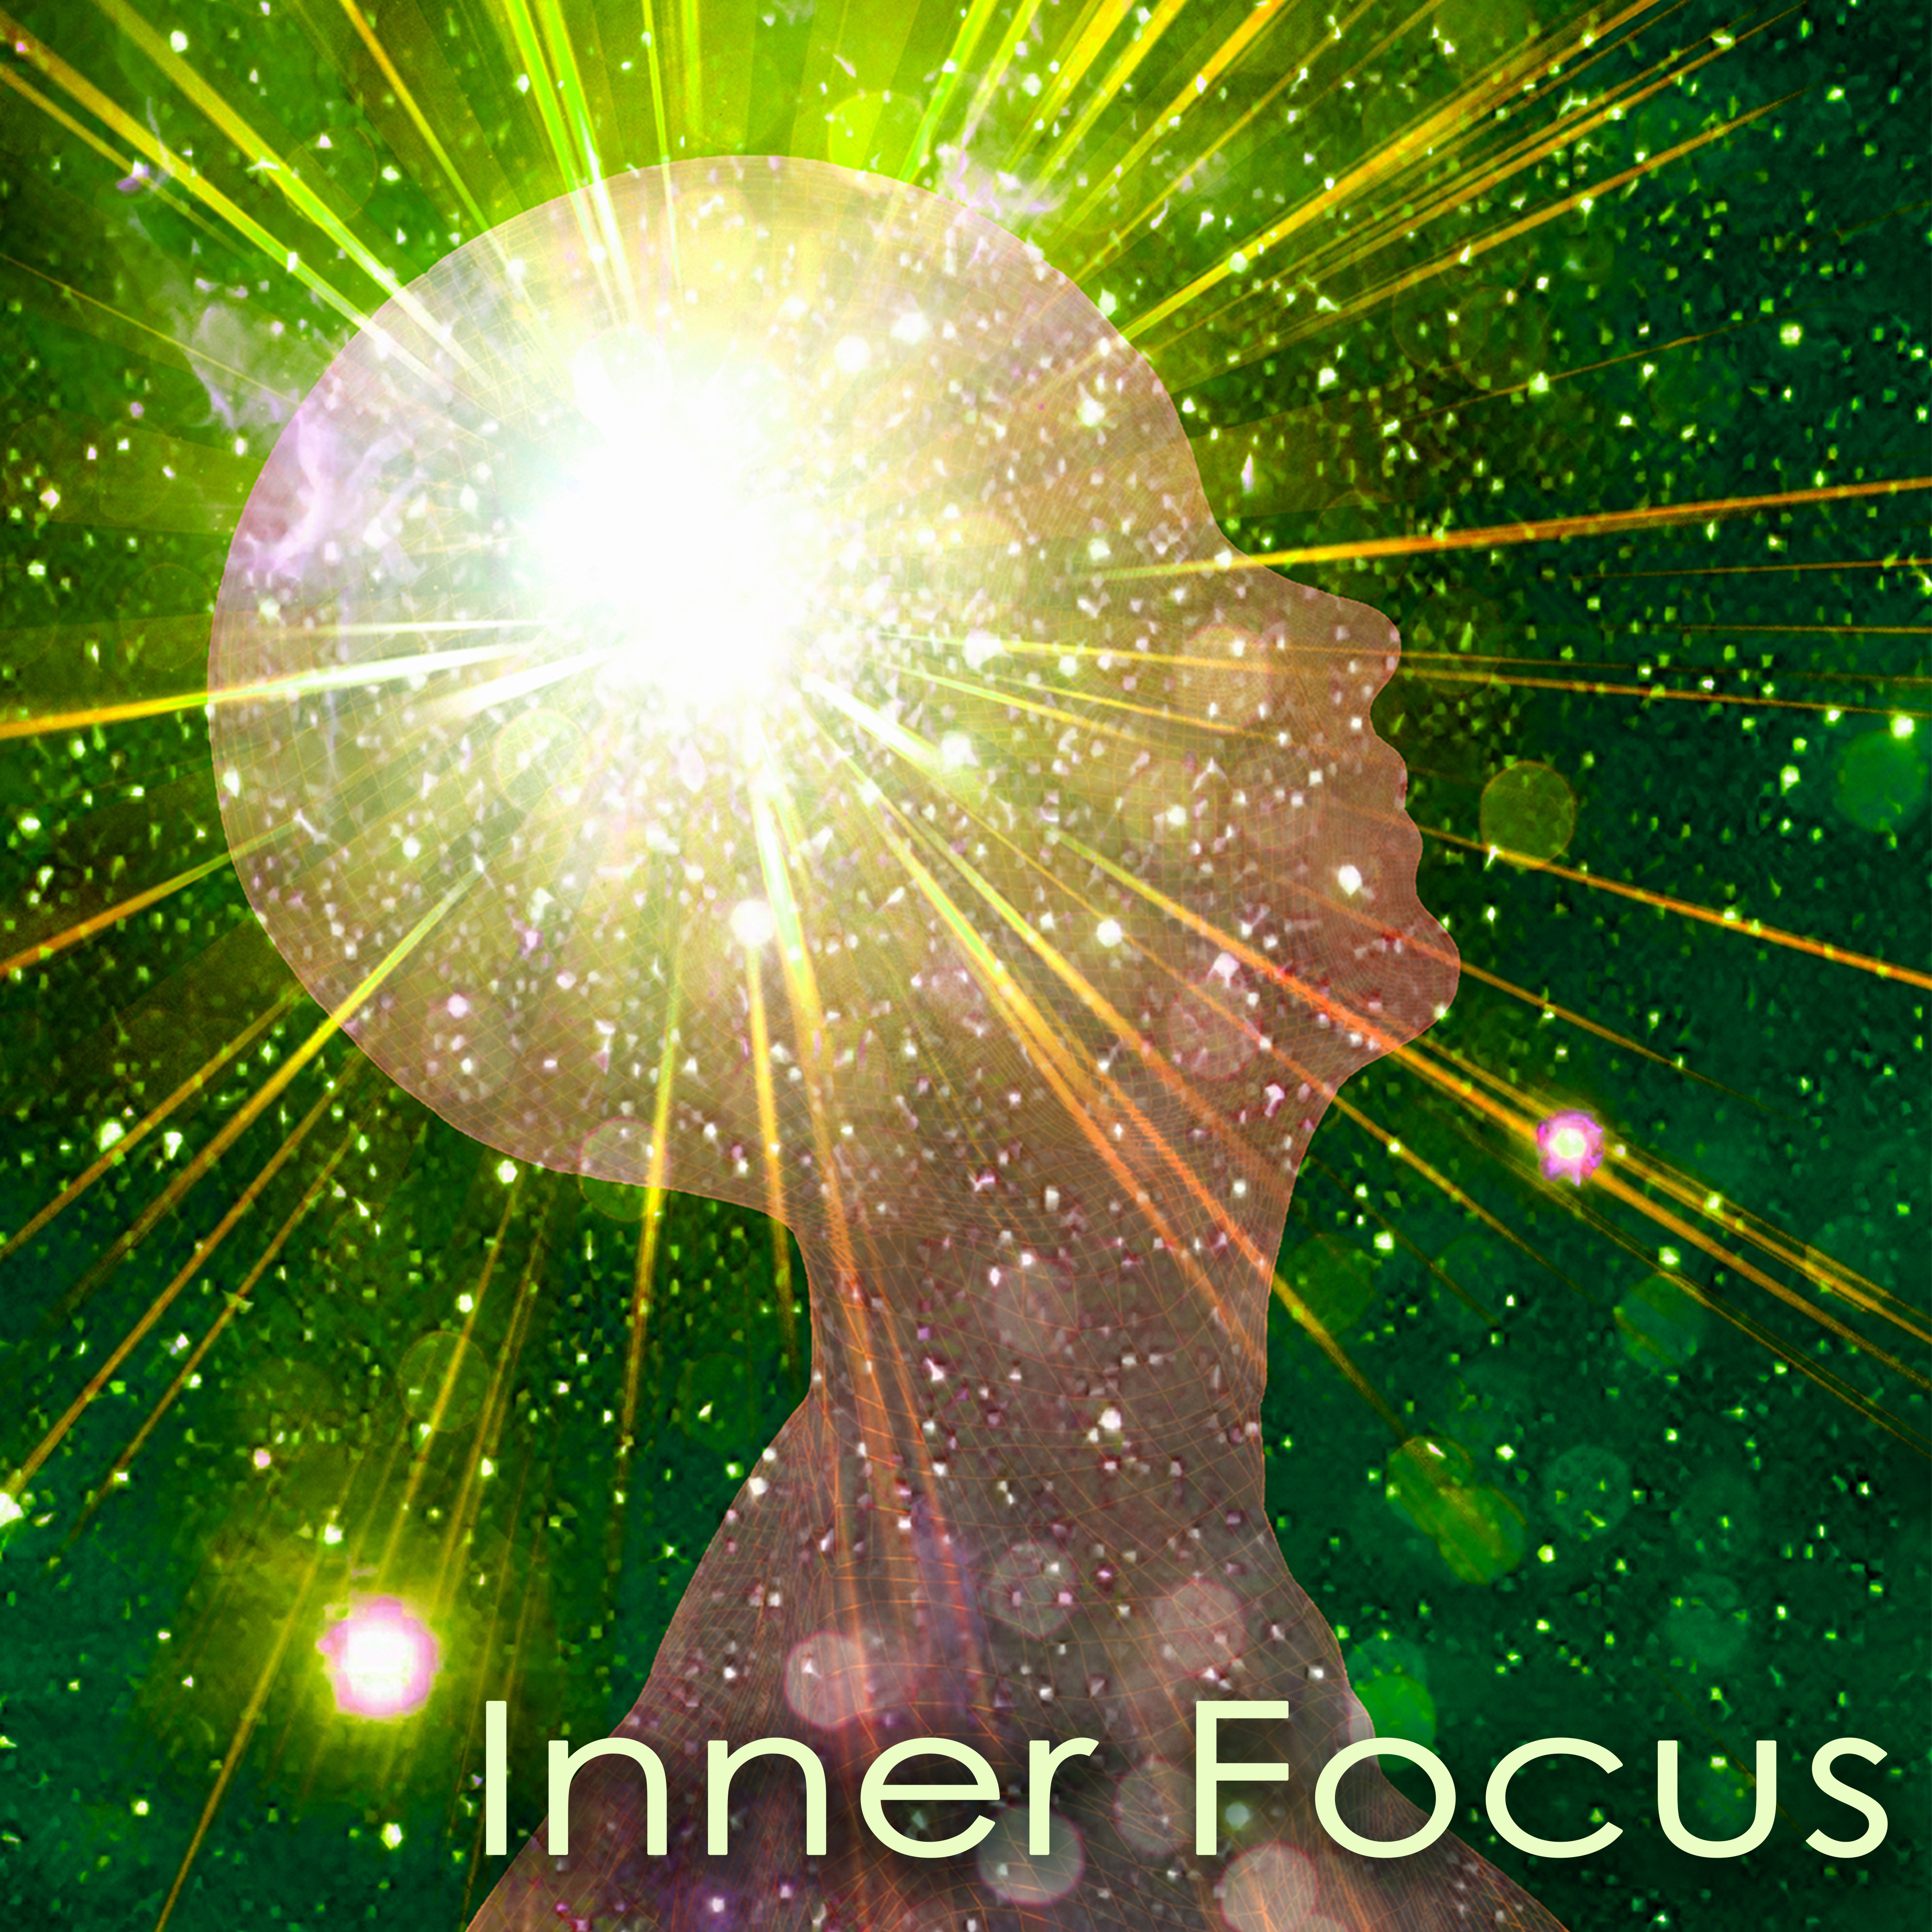 Inner Focus – Mindfulness Meditation Relaxing Music, Mind Power Awakening Music for Concentration